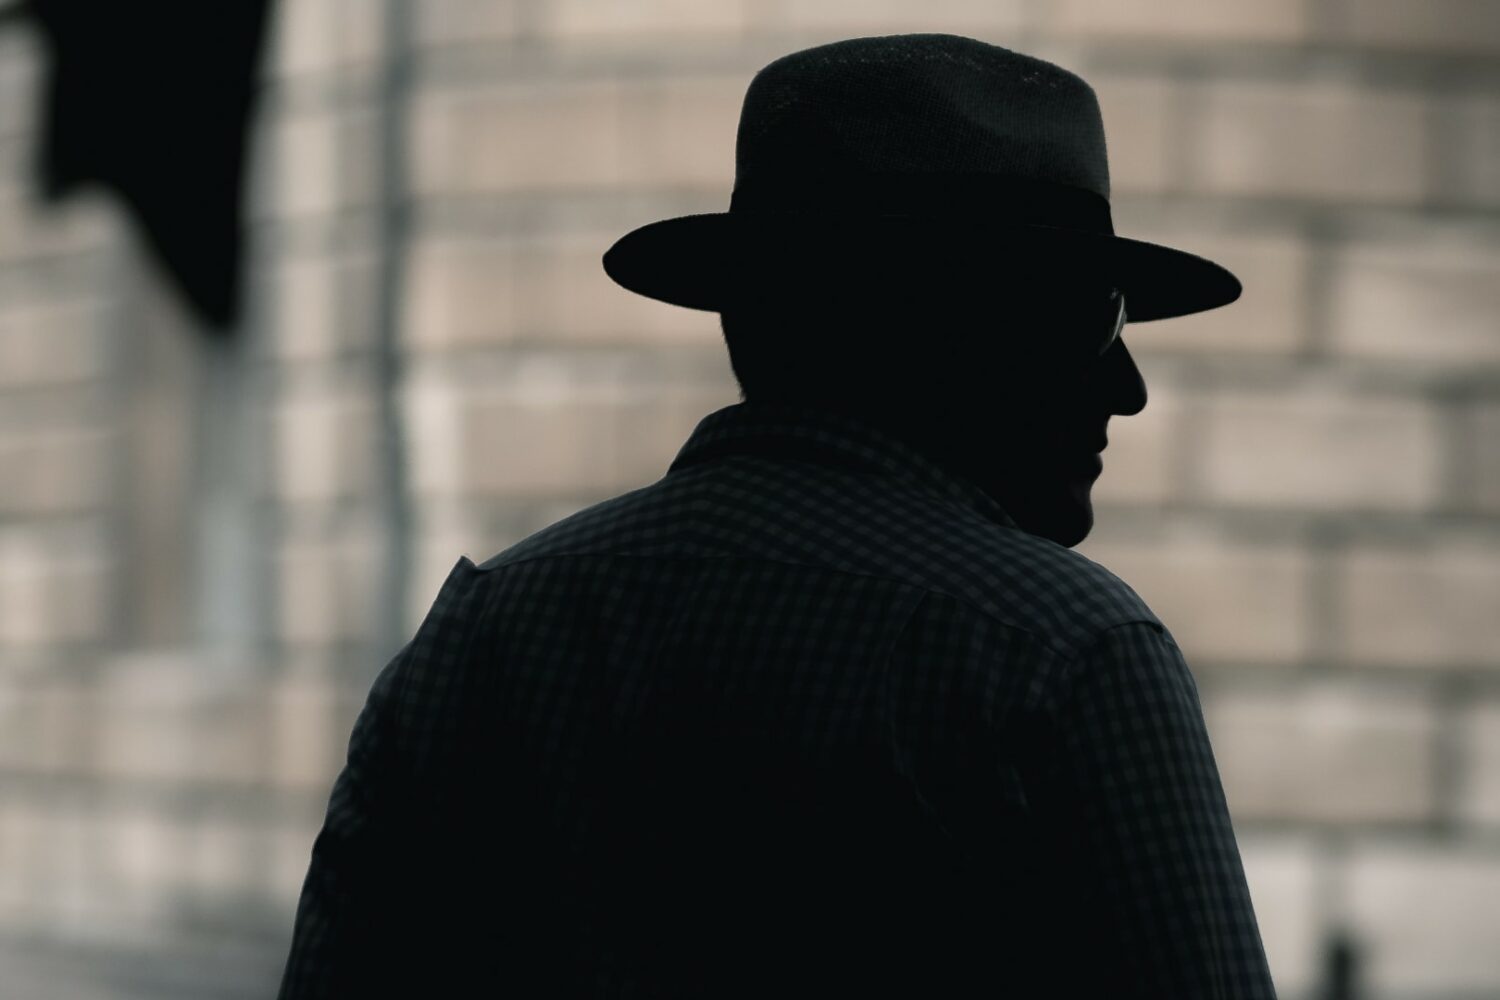 Silhouette of a detective standing on the street, set against a blurred focus background